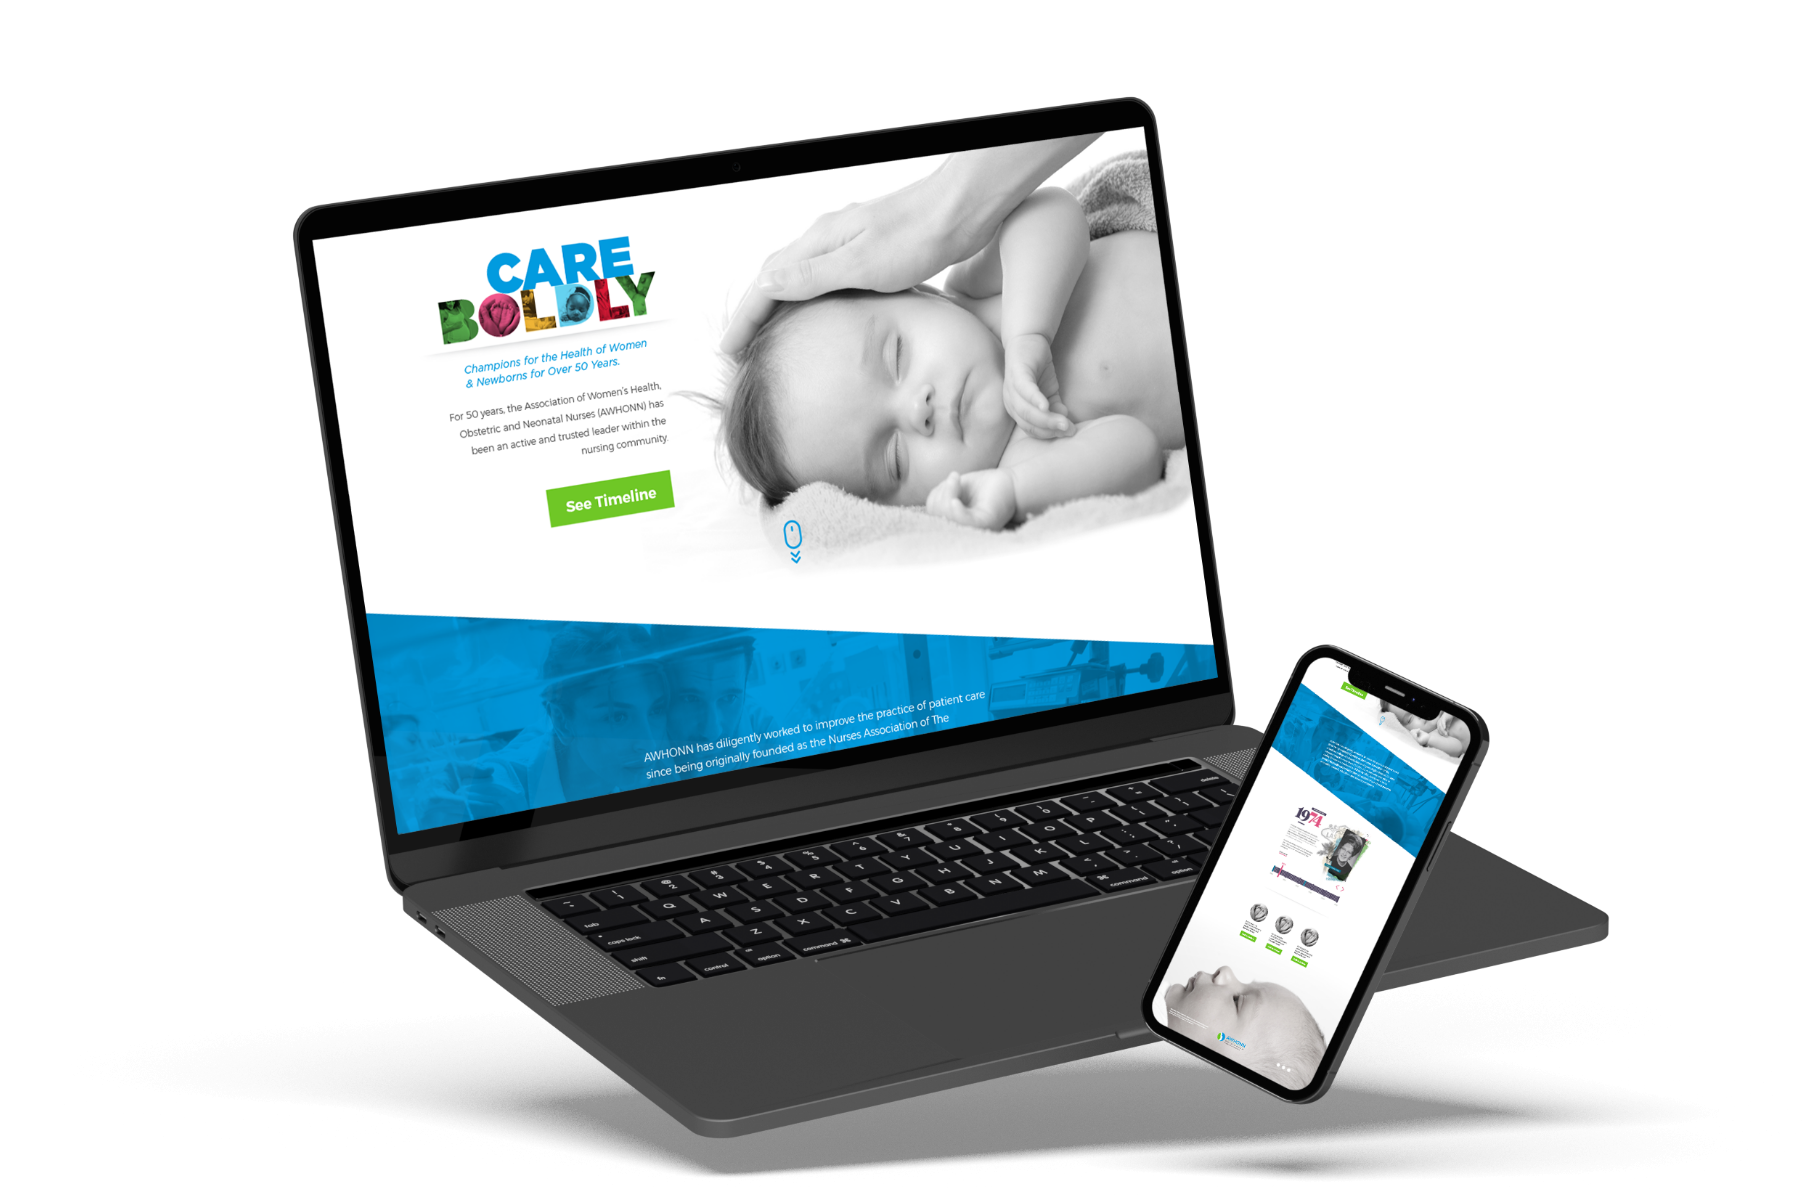 A laptop and smartphone displaying a website for "caredolly," promoting expert prenatal and postpartum care in collaboration with AWHONN's 50th Anniversary campaign, with a tranquil black and